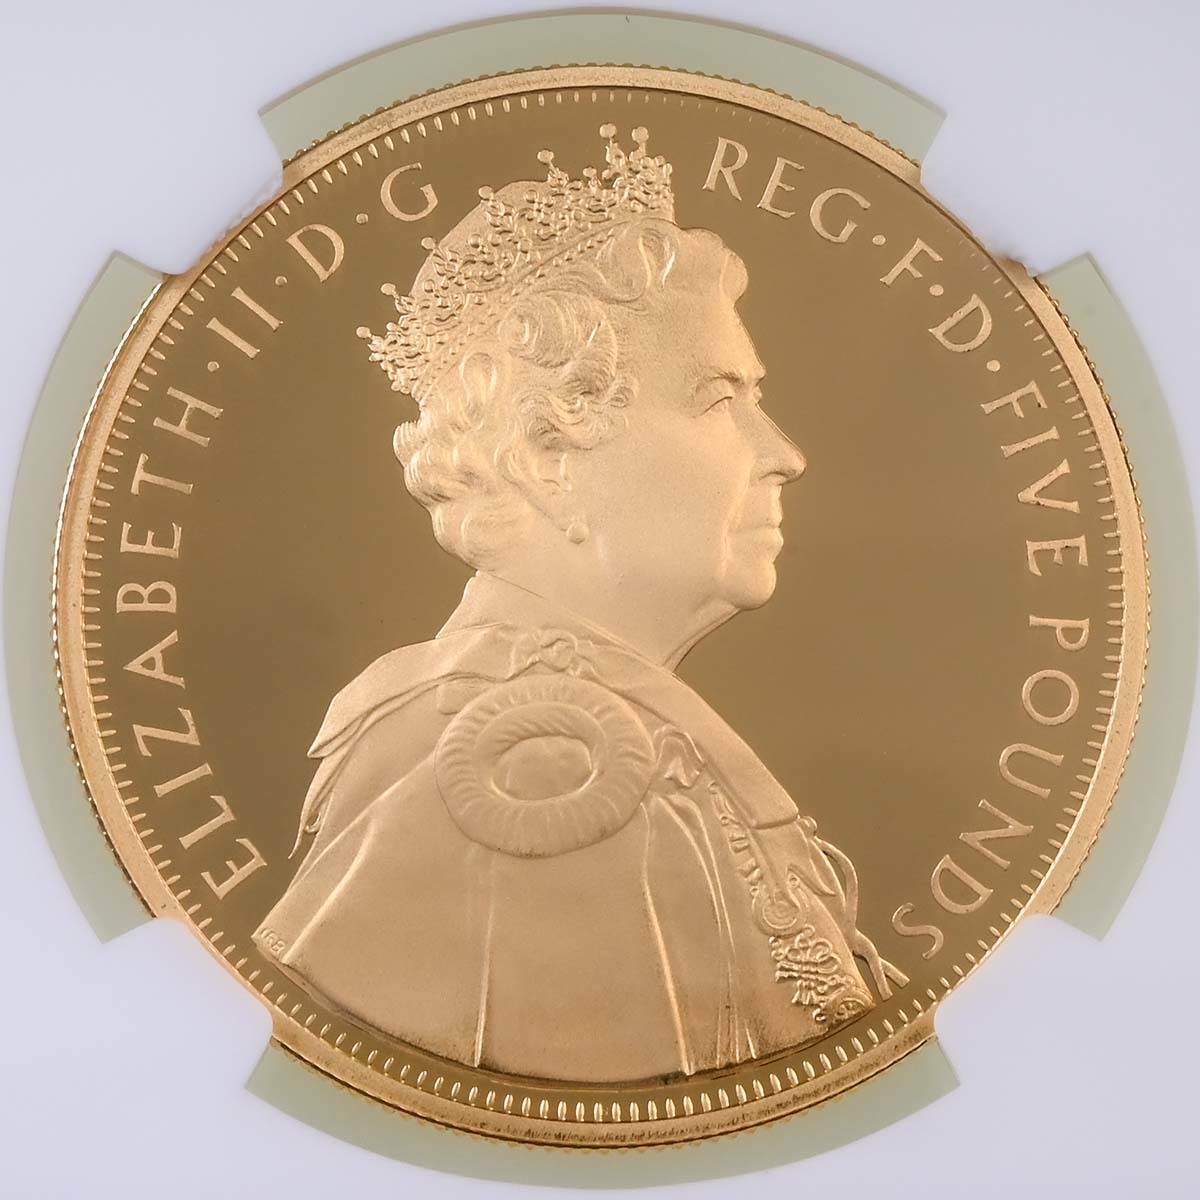 2012 Diamond Jubilee £5 Gold Plated Gilt Silver Proof Coin NGC Graded PF 70 Ultra Cameo Obverse